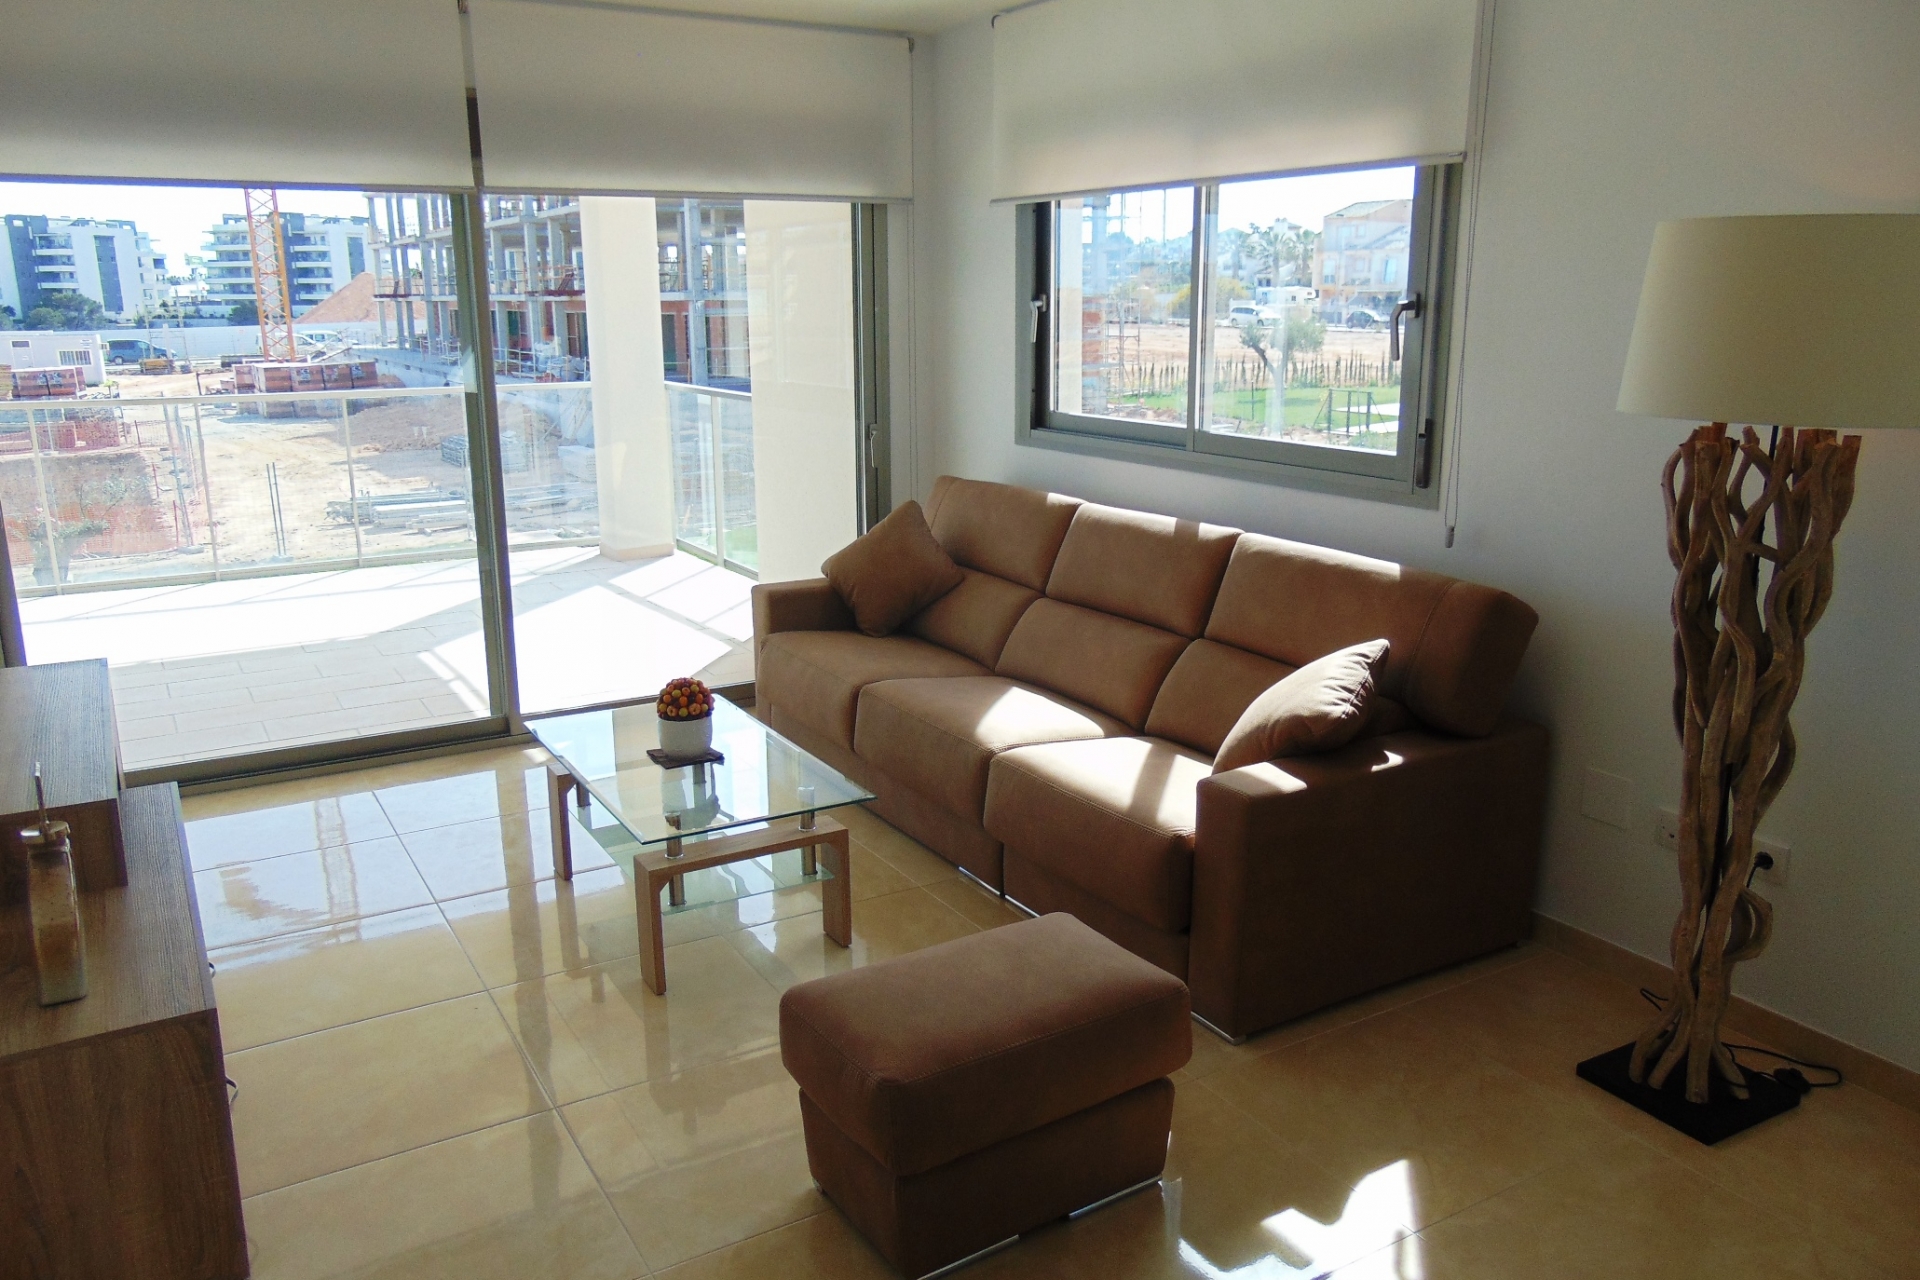 Archived - Apartment for sale - Orihuela Costa - Los Dolses